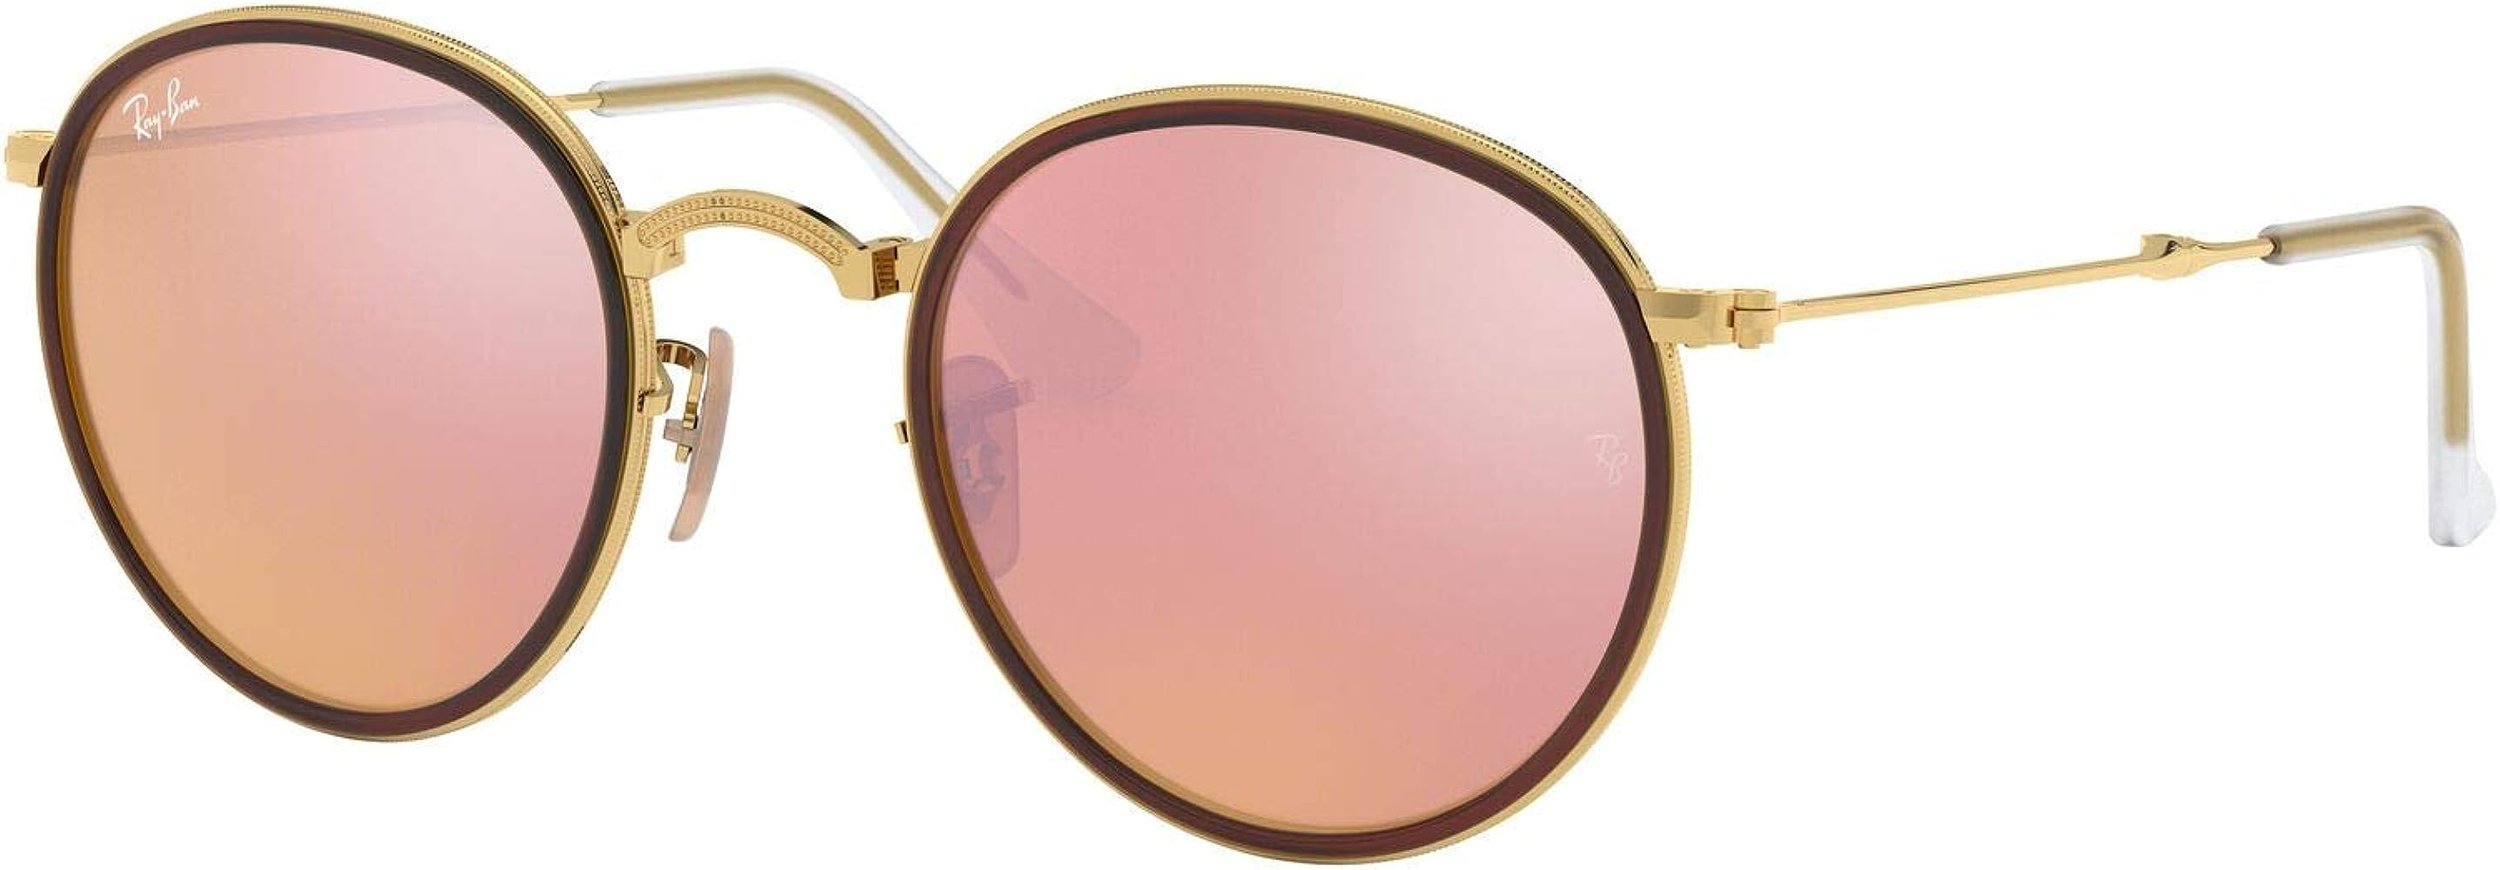 Details more than 254 ray ban pink sunglasses latest